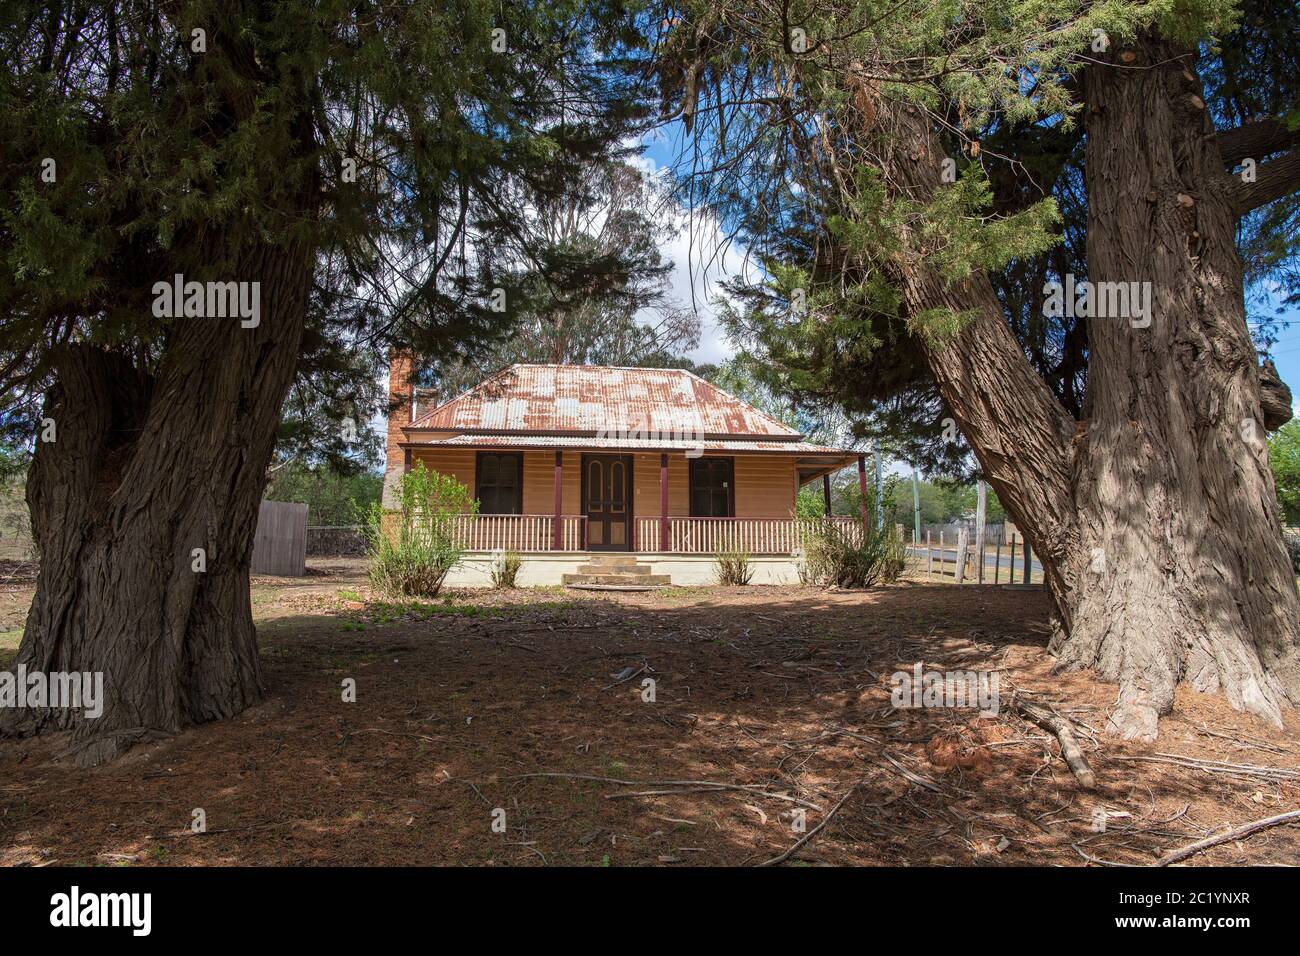 Page 3 Wooden Verandah High Resolution Stock Photography And Images Alamy